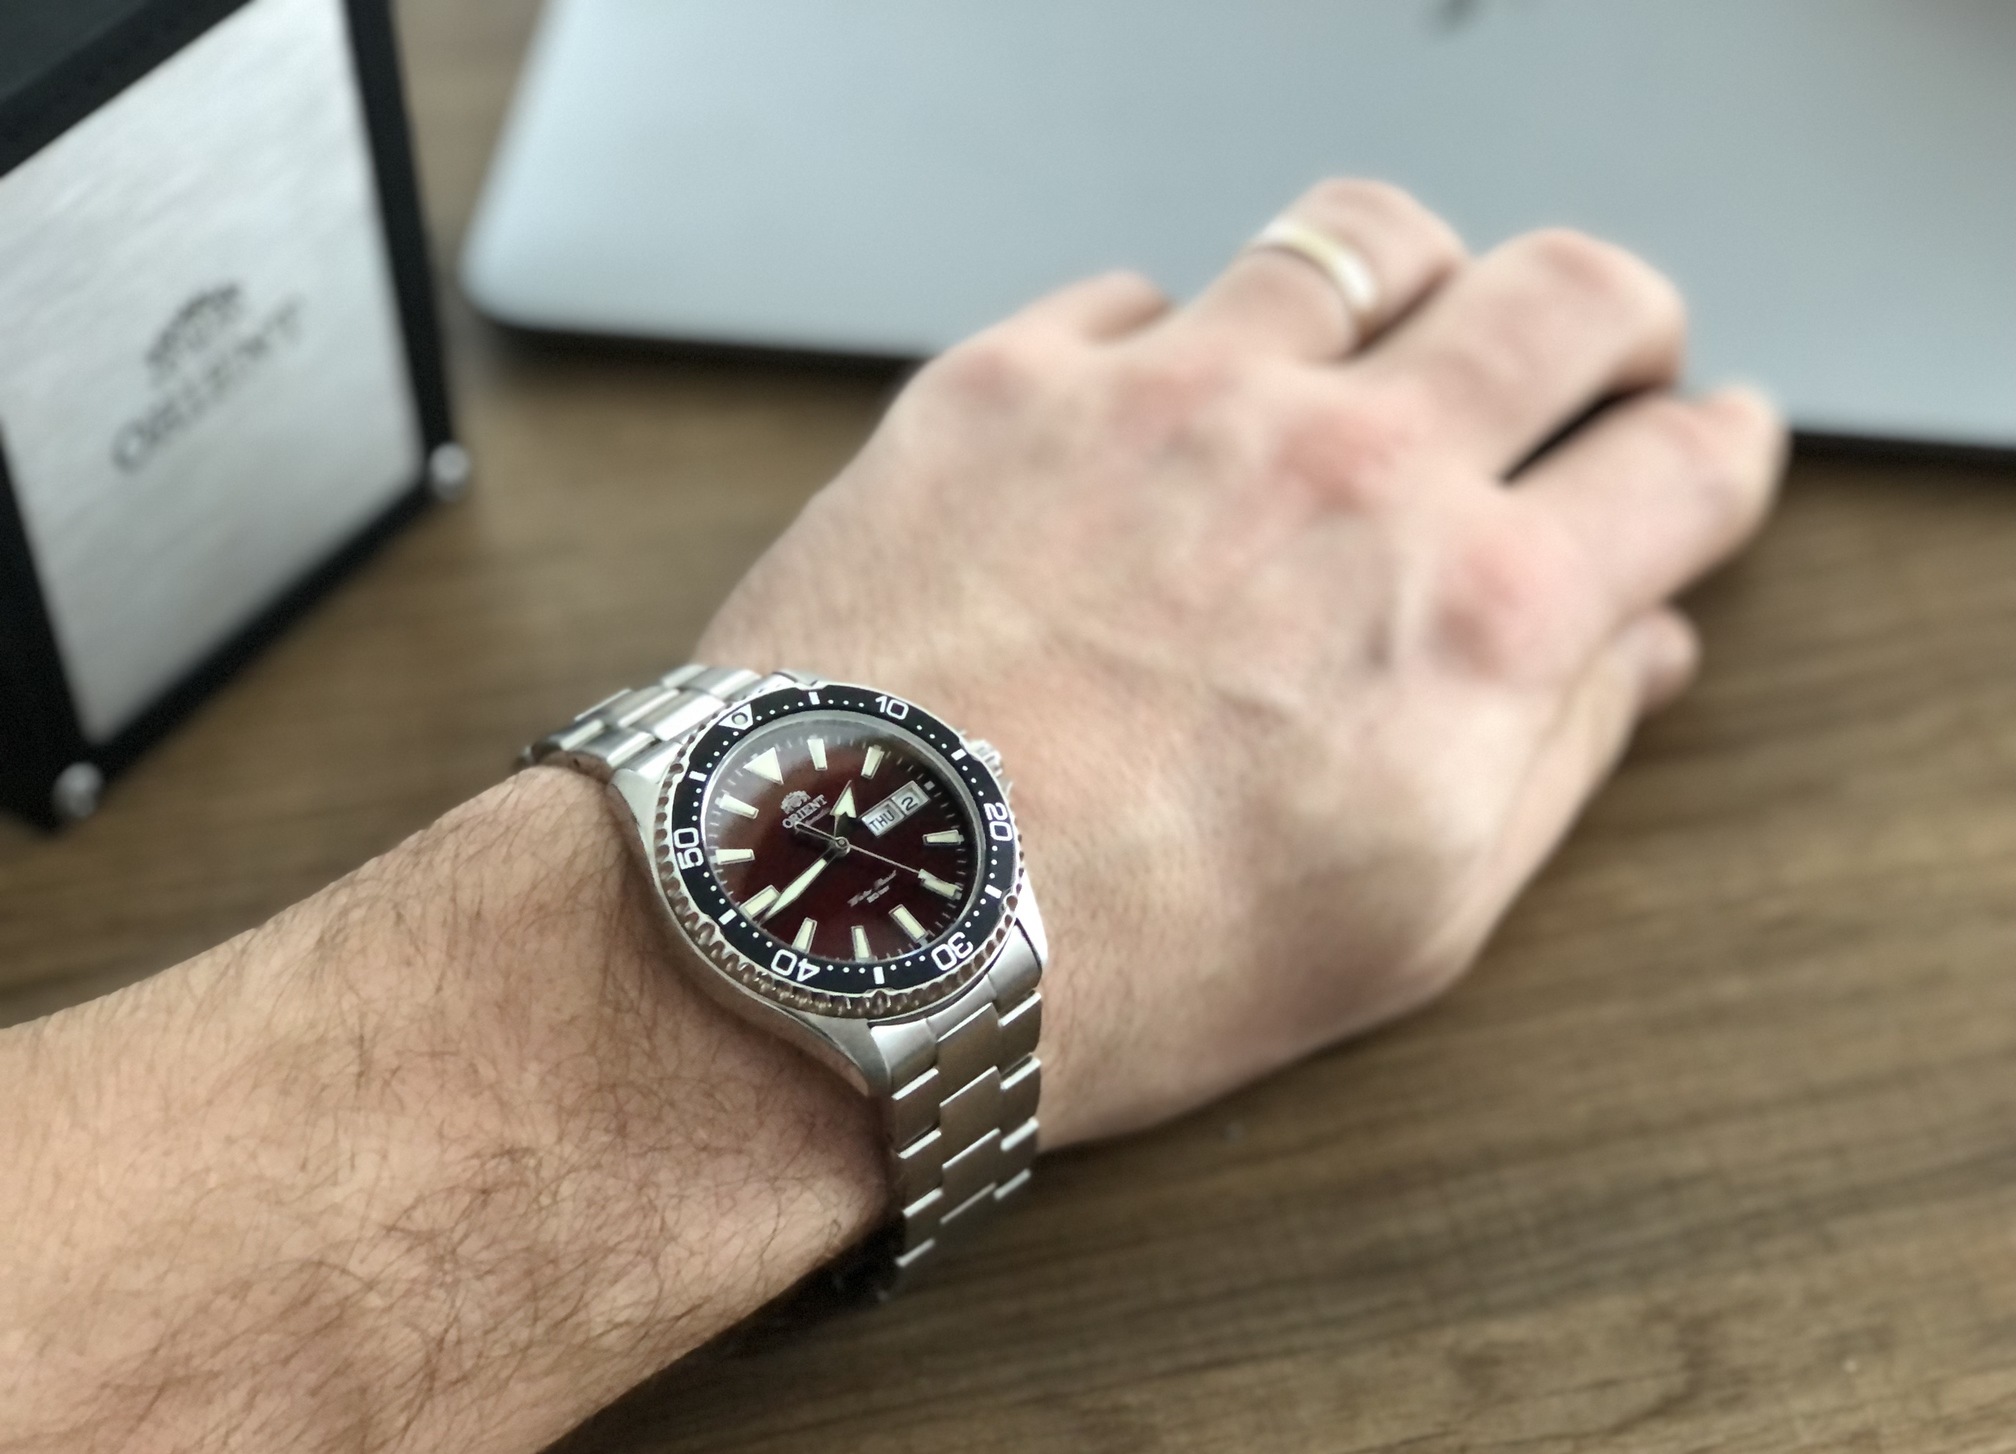 Watch on the left hand next to Macbook